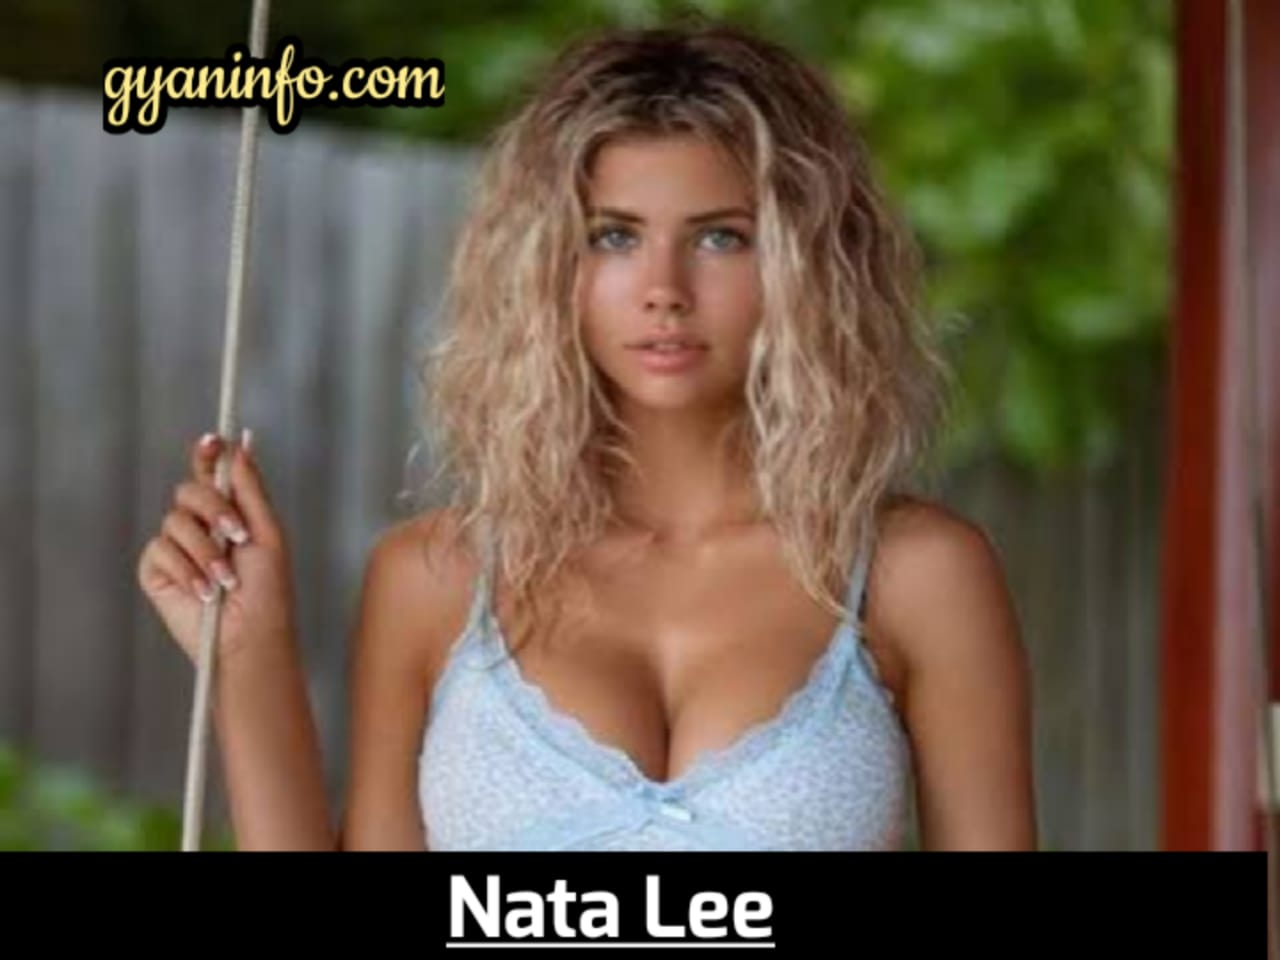 Nata Lee Biography, Height, Age, Weight, Body Measurements, Boyfriend, Video, Family, Parents, Net Worth, Wiki & More